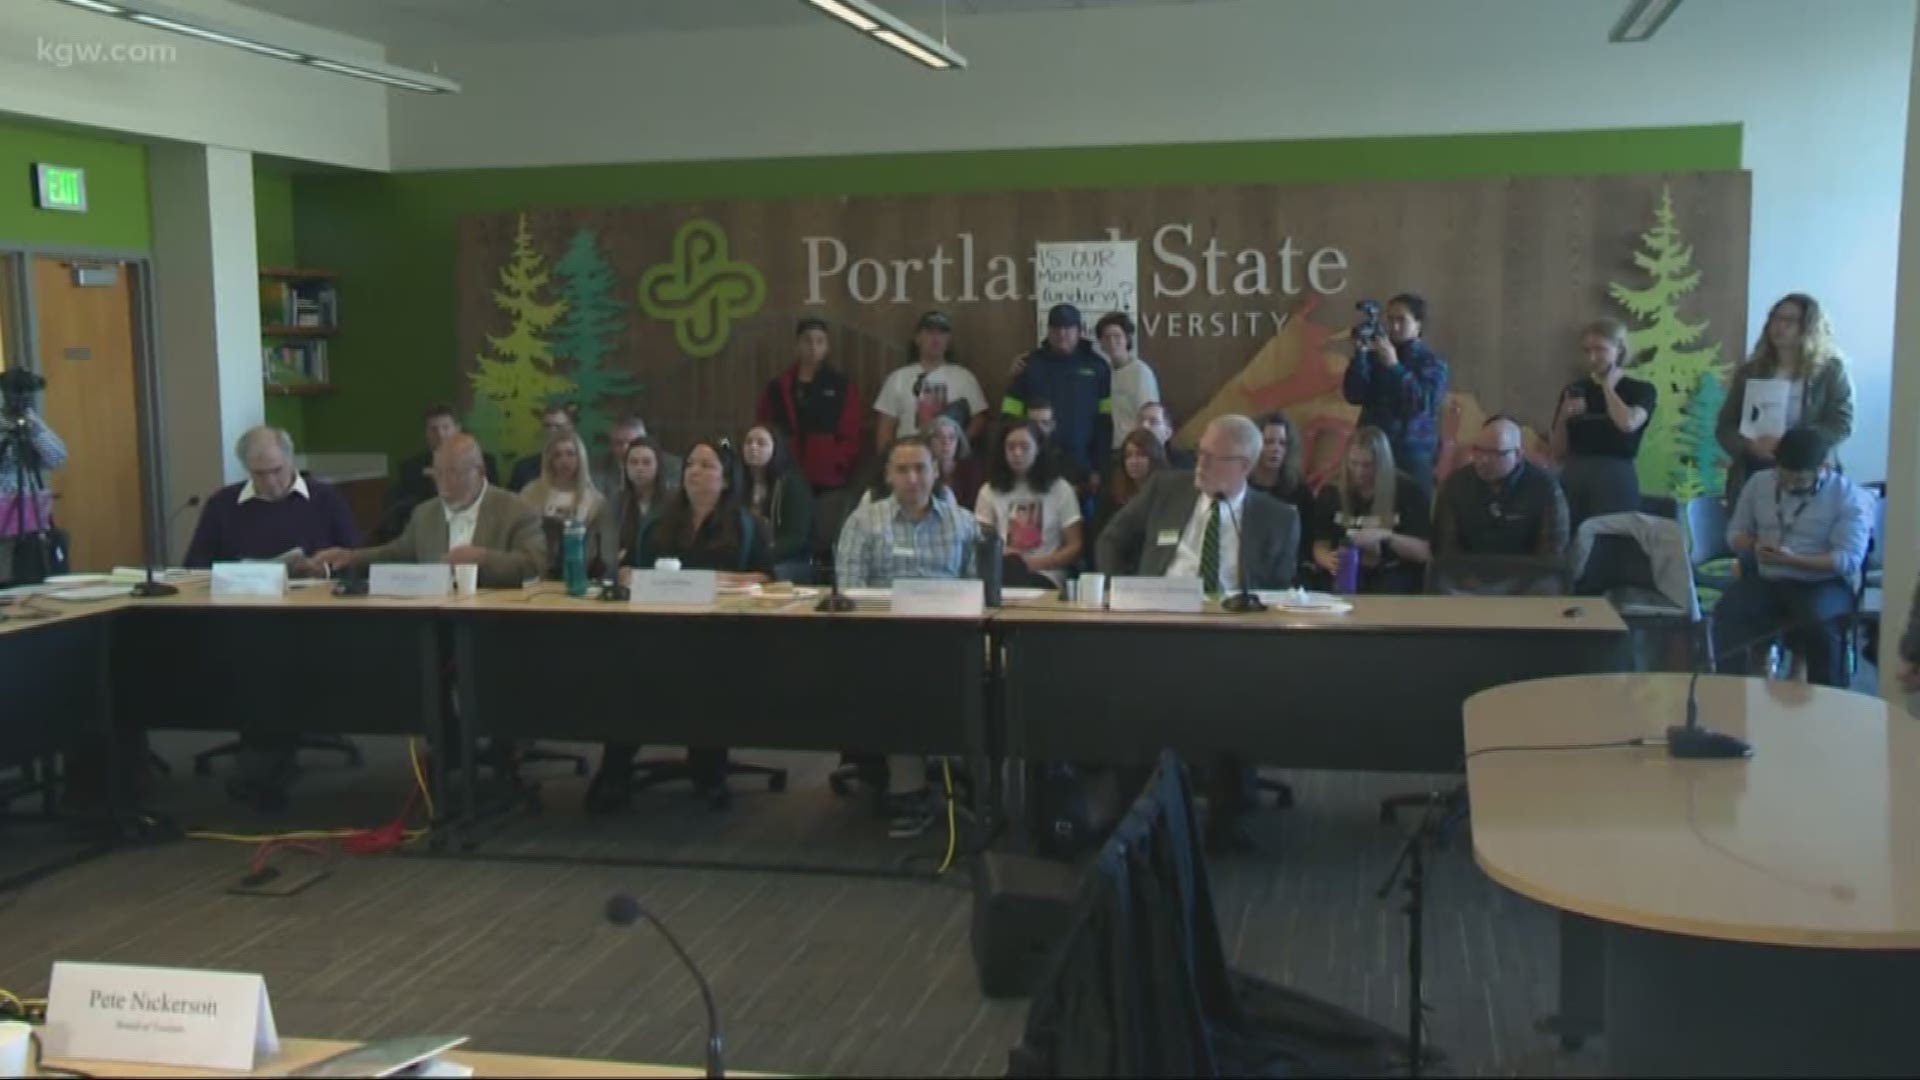 Portland State University will keep armed campus police officers. The announcement came during a meeting of the PSU Board of Trustees on Thursday morning.